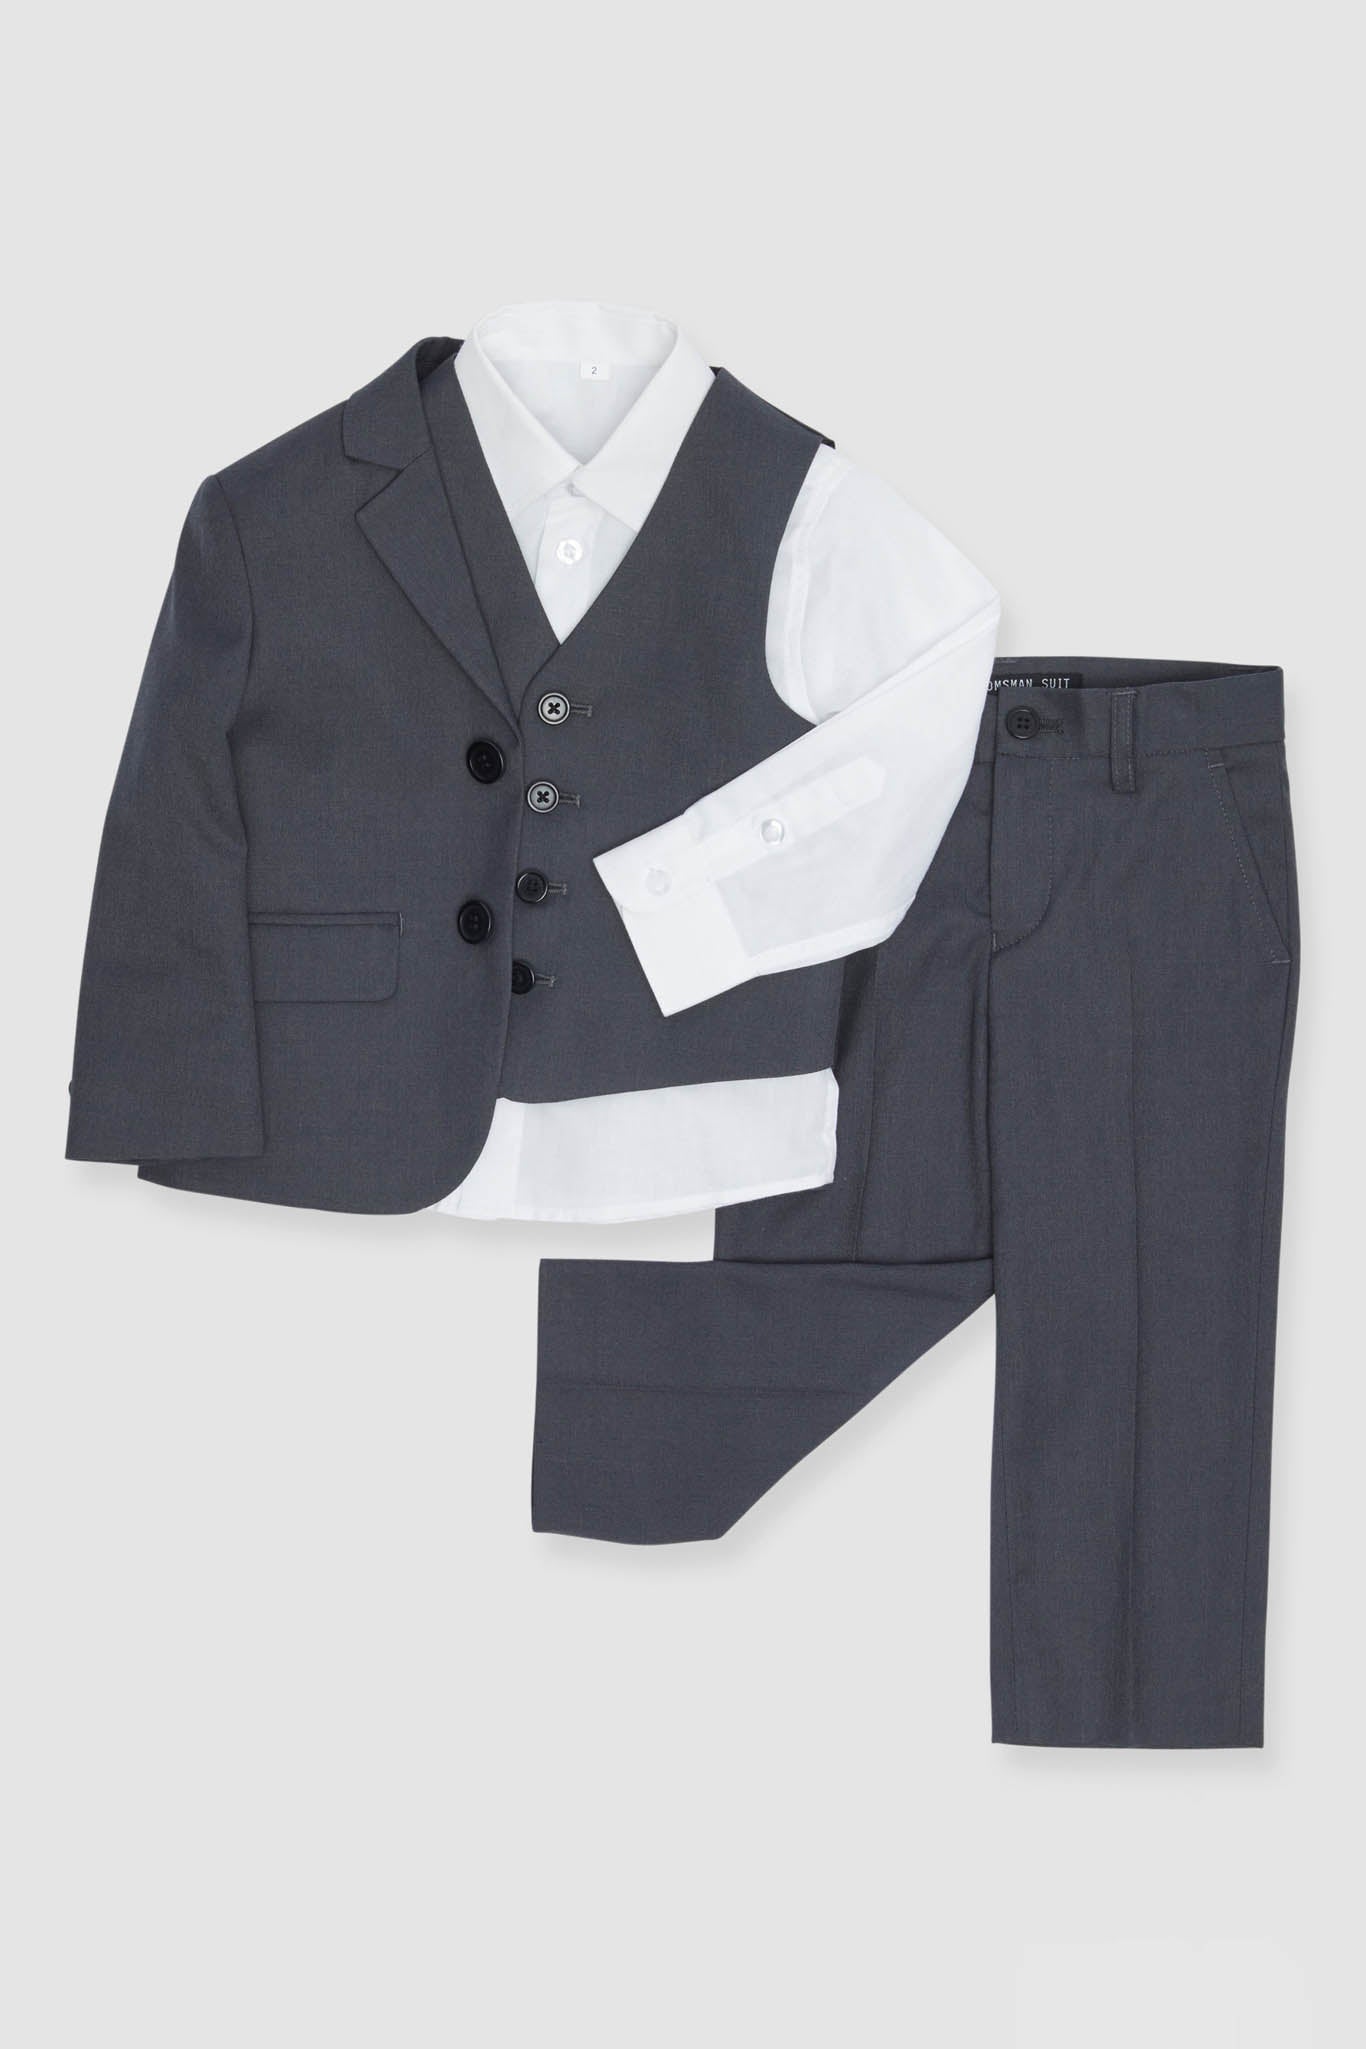 Charcoal Gray Kids Suit by SuitShop